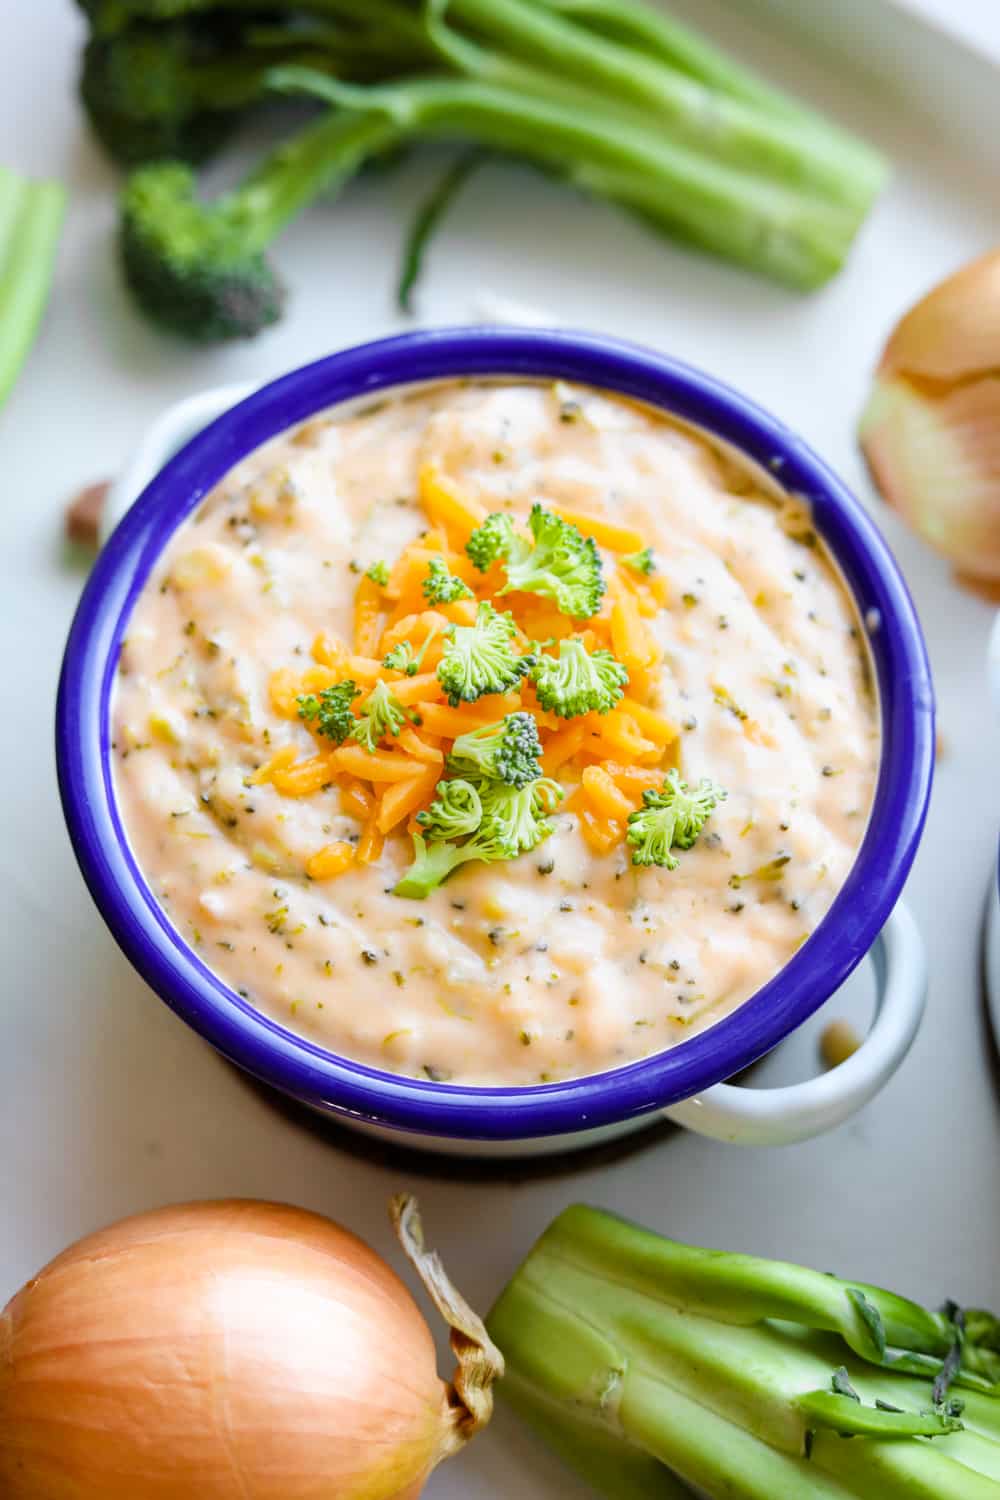 Low carb broccoli and cheese soup in a bowl topped with cheddar cheese.